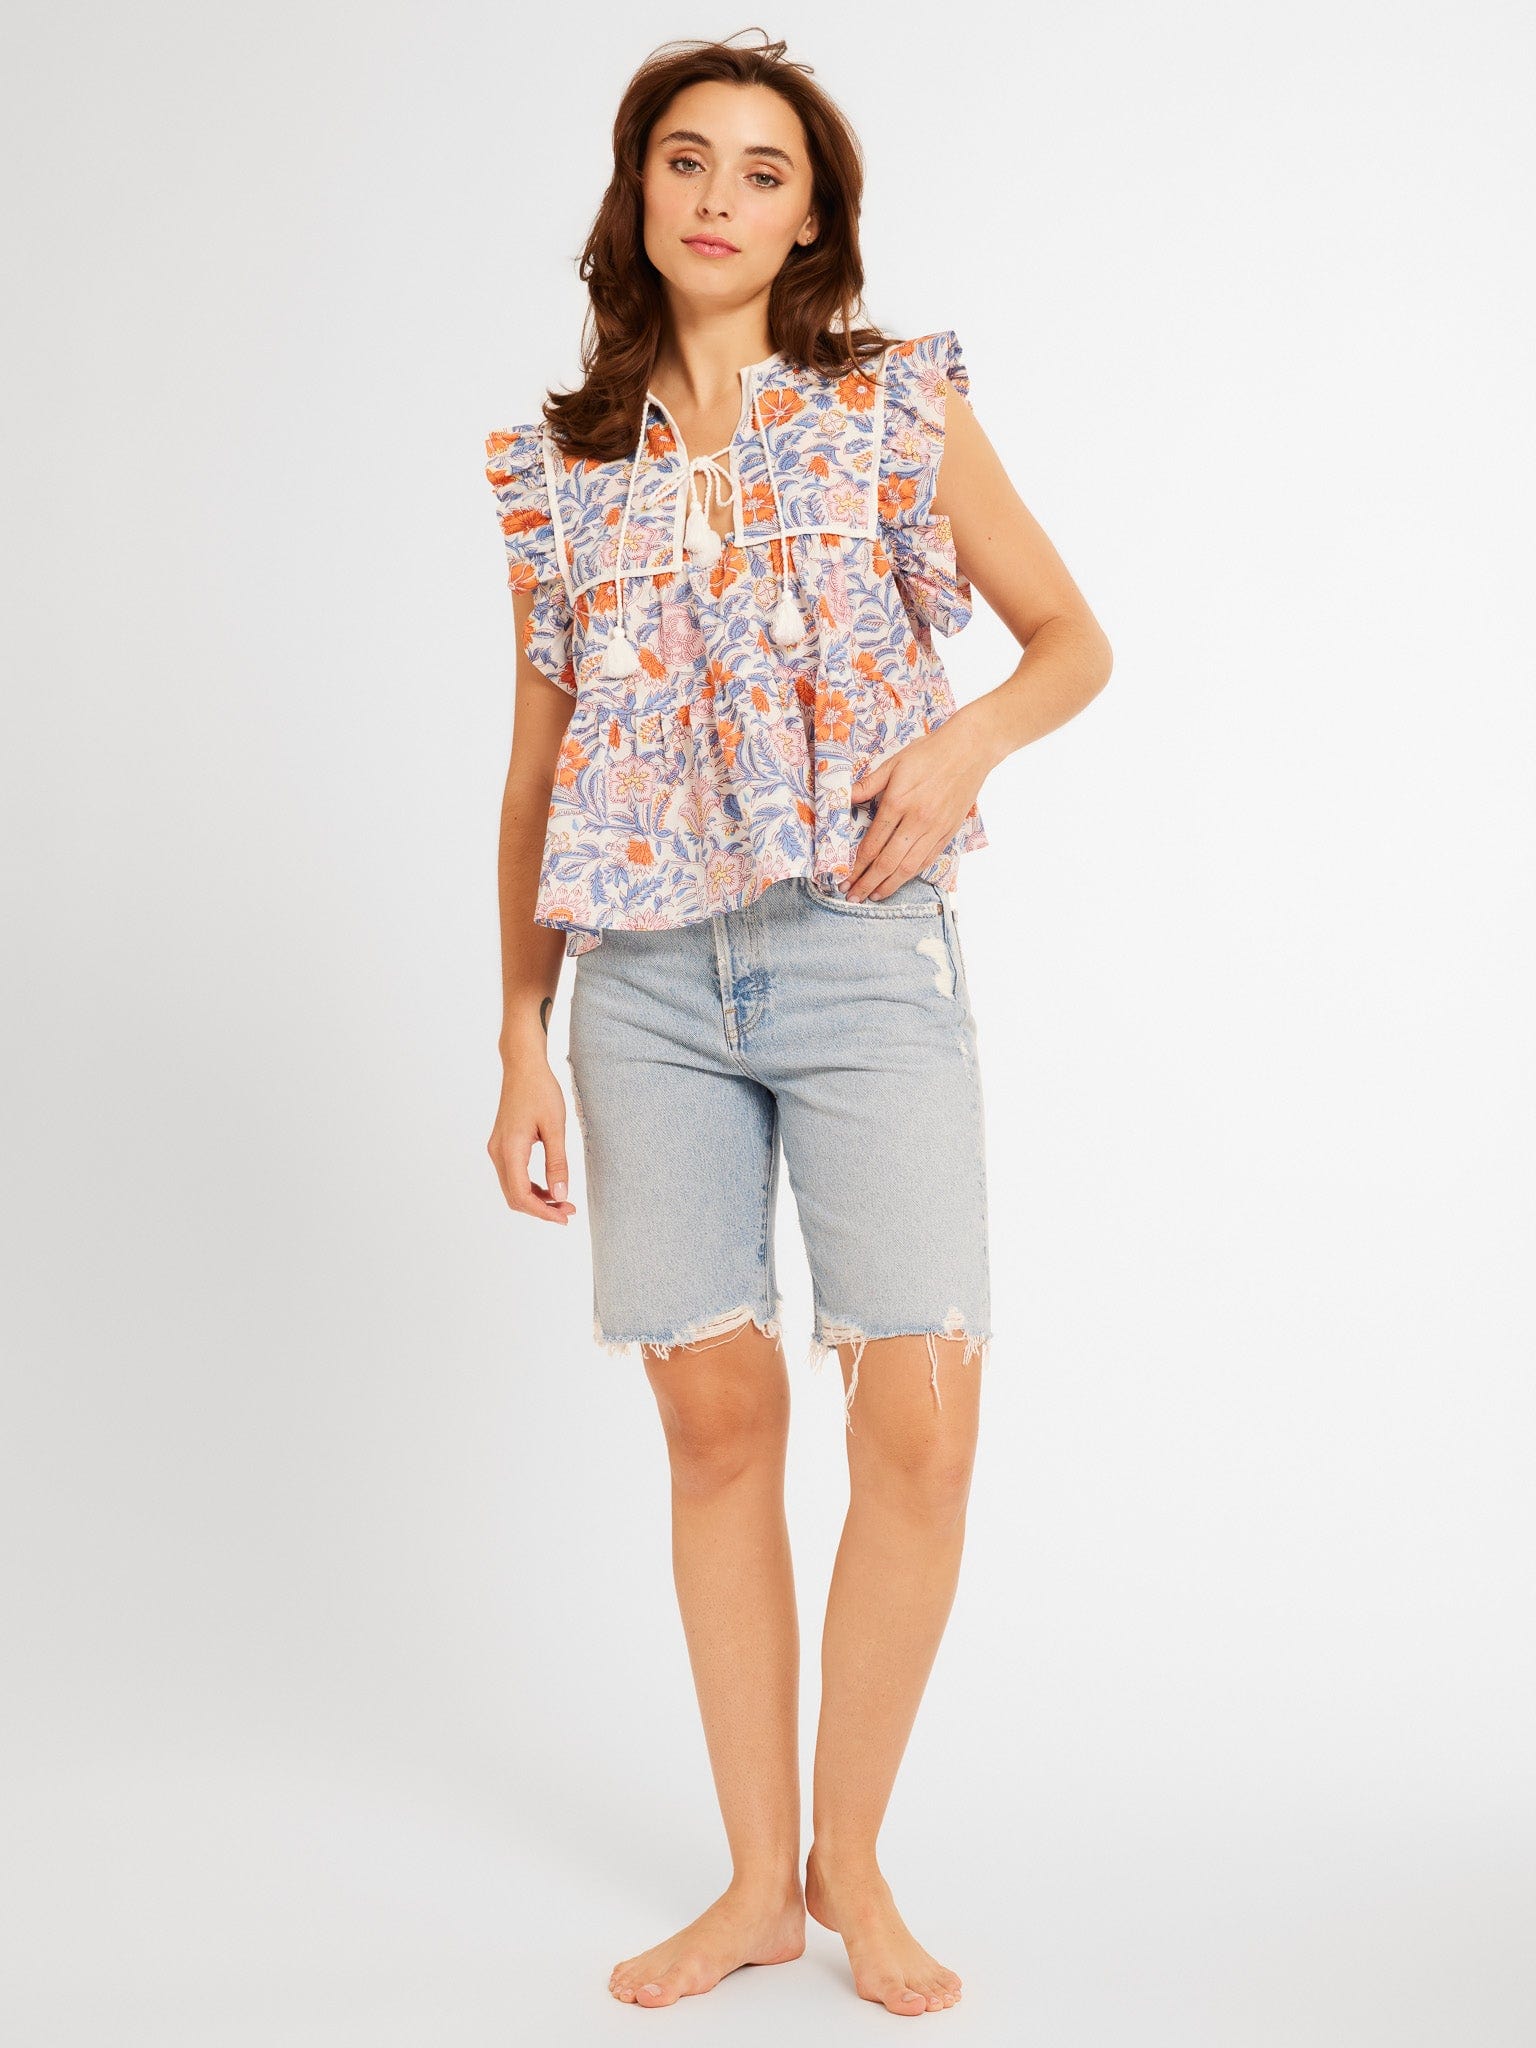 MILLE Clothing Chelsea Top in Newport Floral